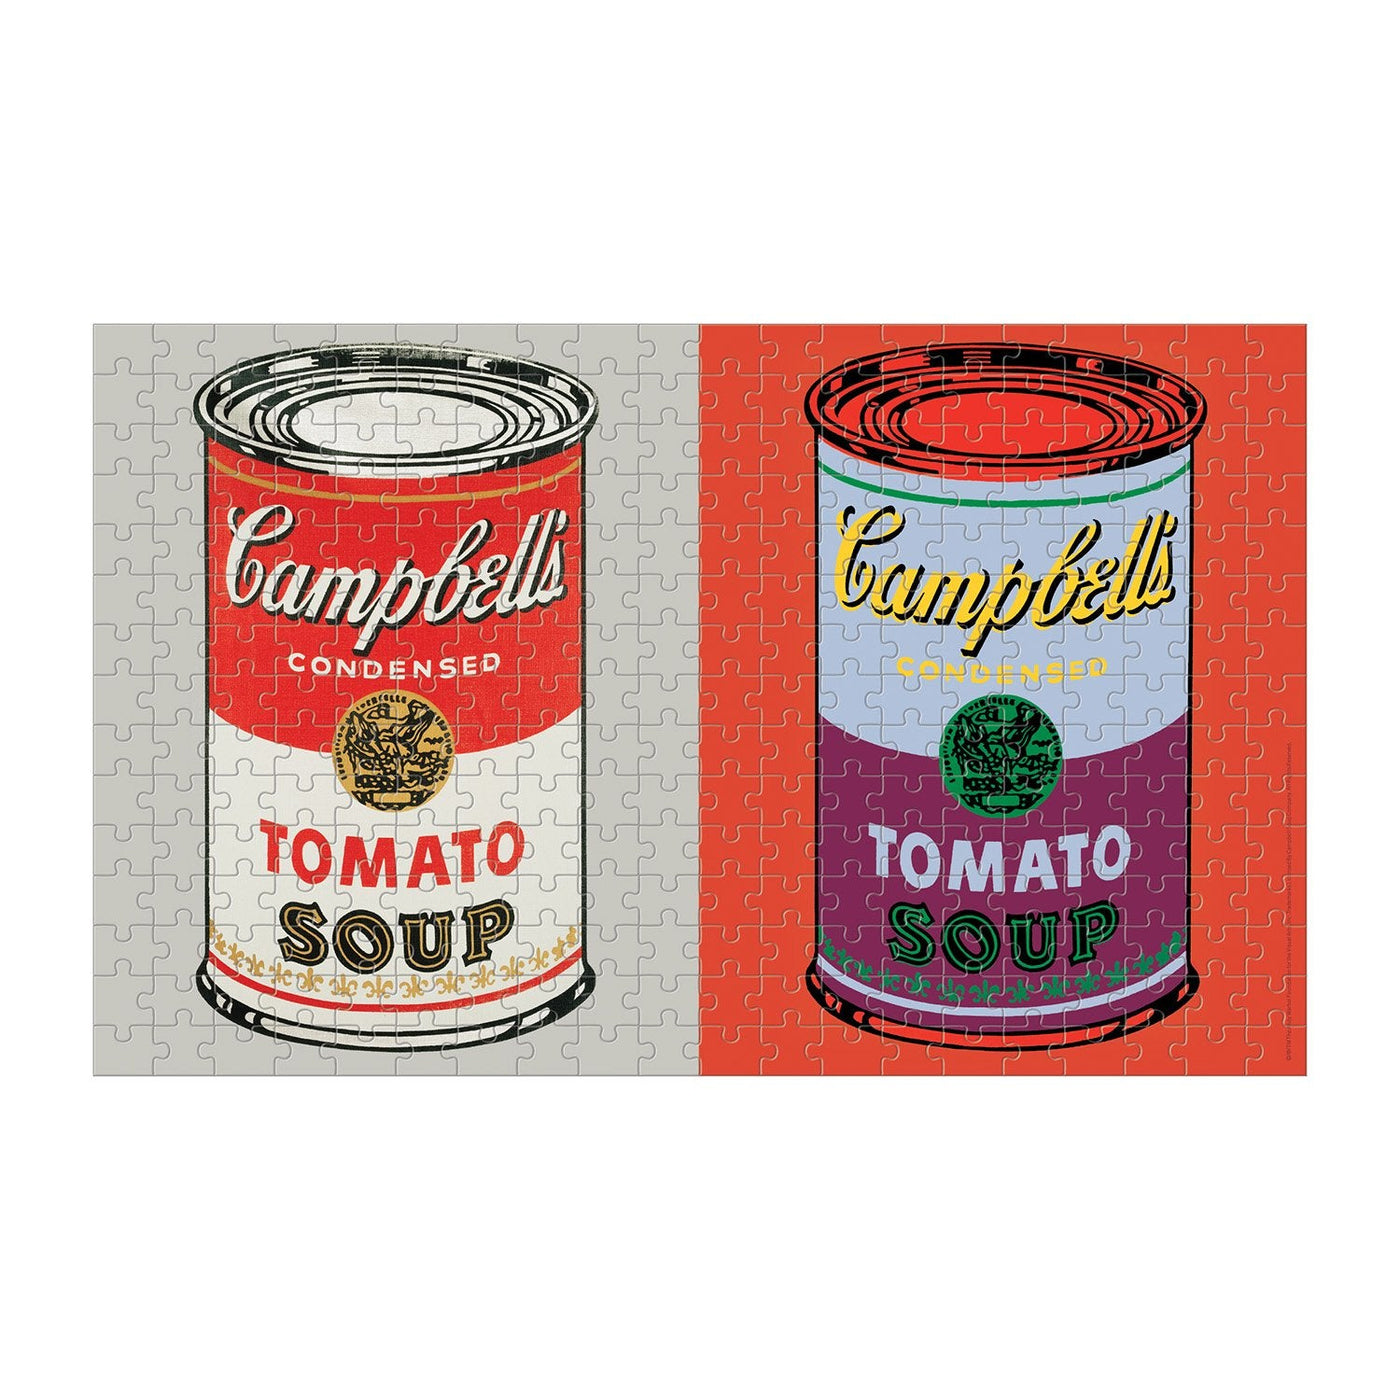 Andy Warhol Soup Cans | 300 Piece Jigsaw Puzzle